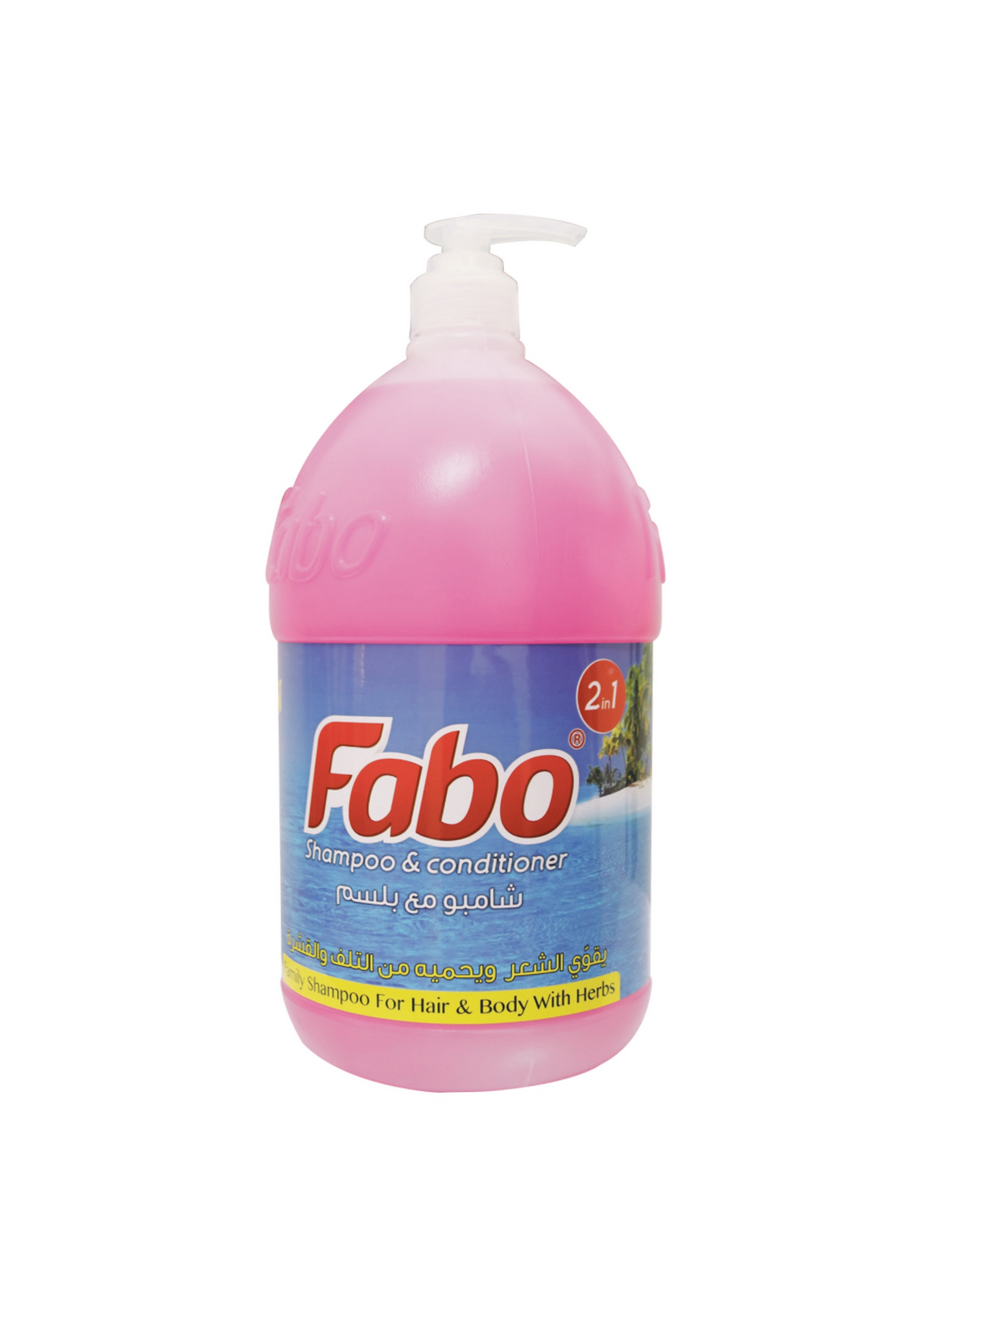 fabo-products_page-0060